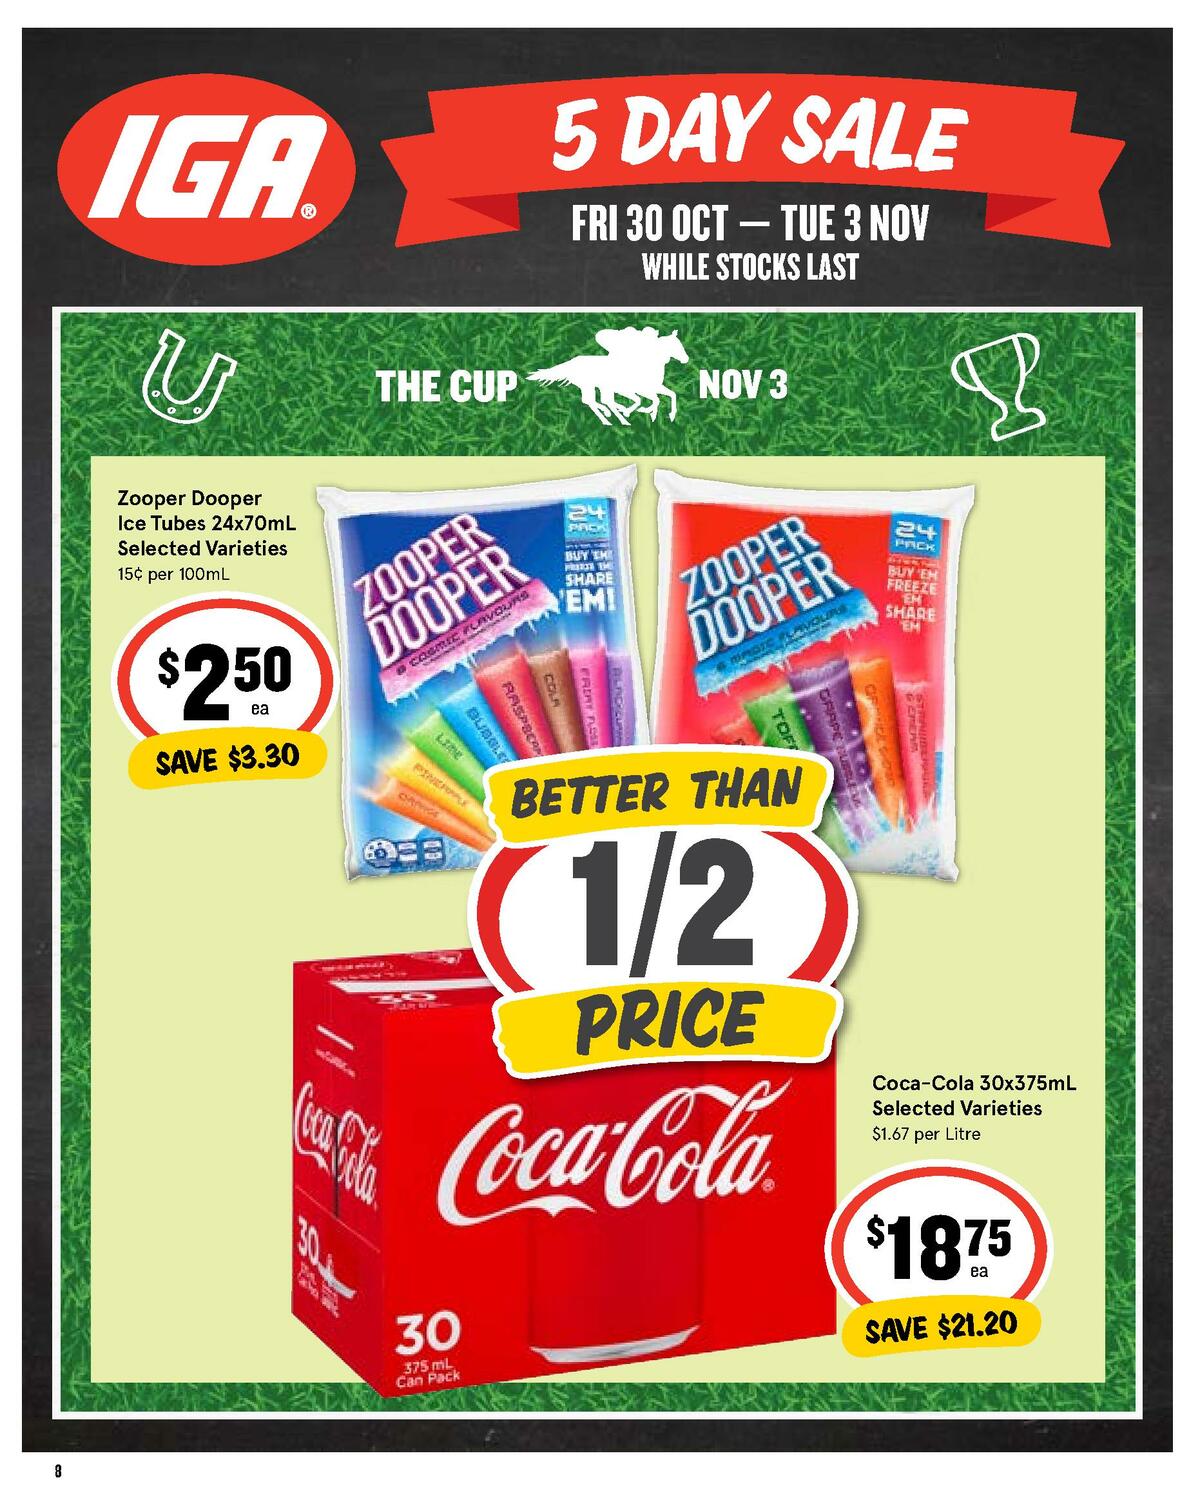 IGA 5 Day Sale Catalogues from 30 October